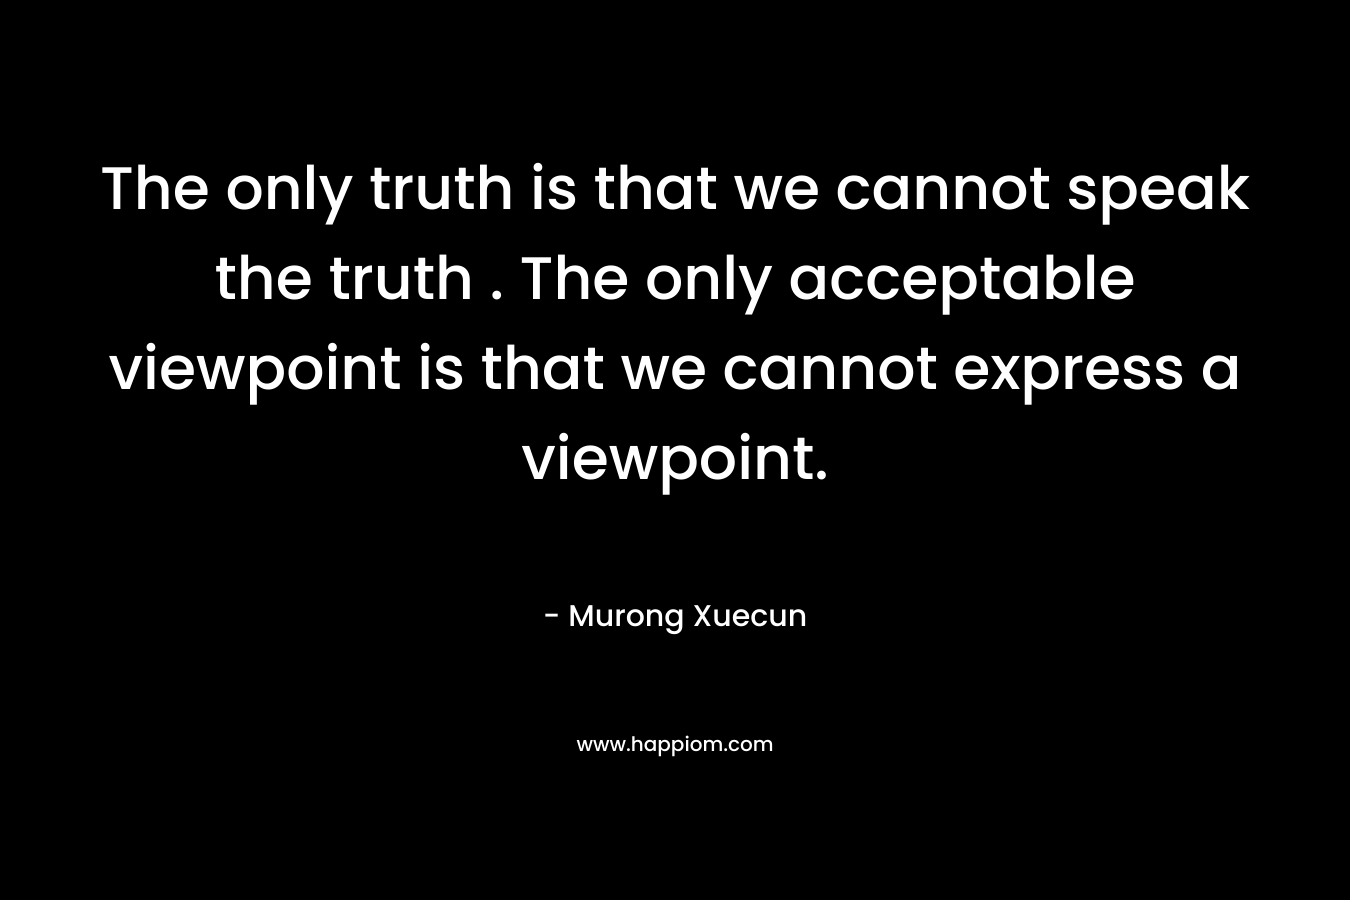 The only truth is that we cannot speak the truth . The only acceptable viewpoint is that we cannot express a viewpoint.